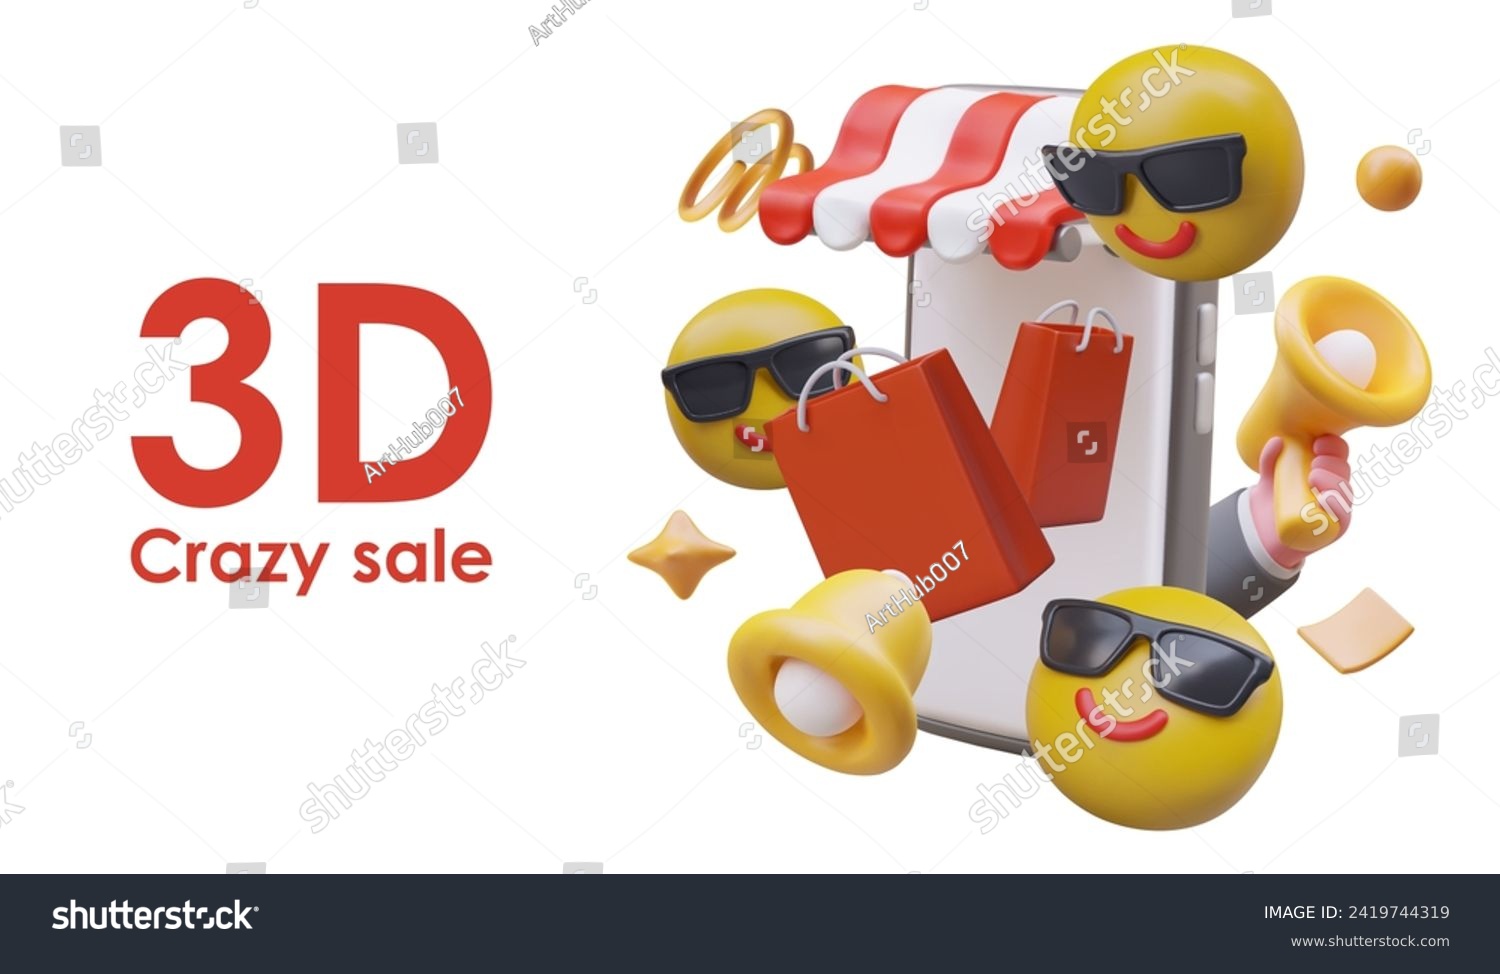 SVG of Poster for online store. Crazy sale. Modern smartphone with shopping bags, emoji with sunglasses svg